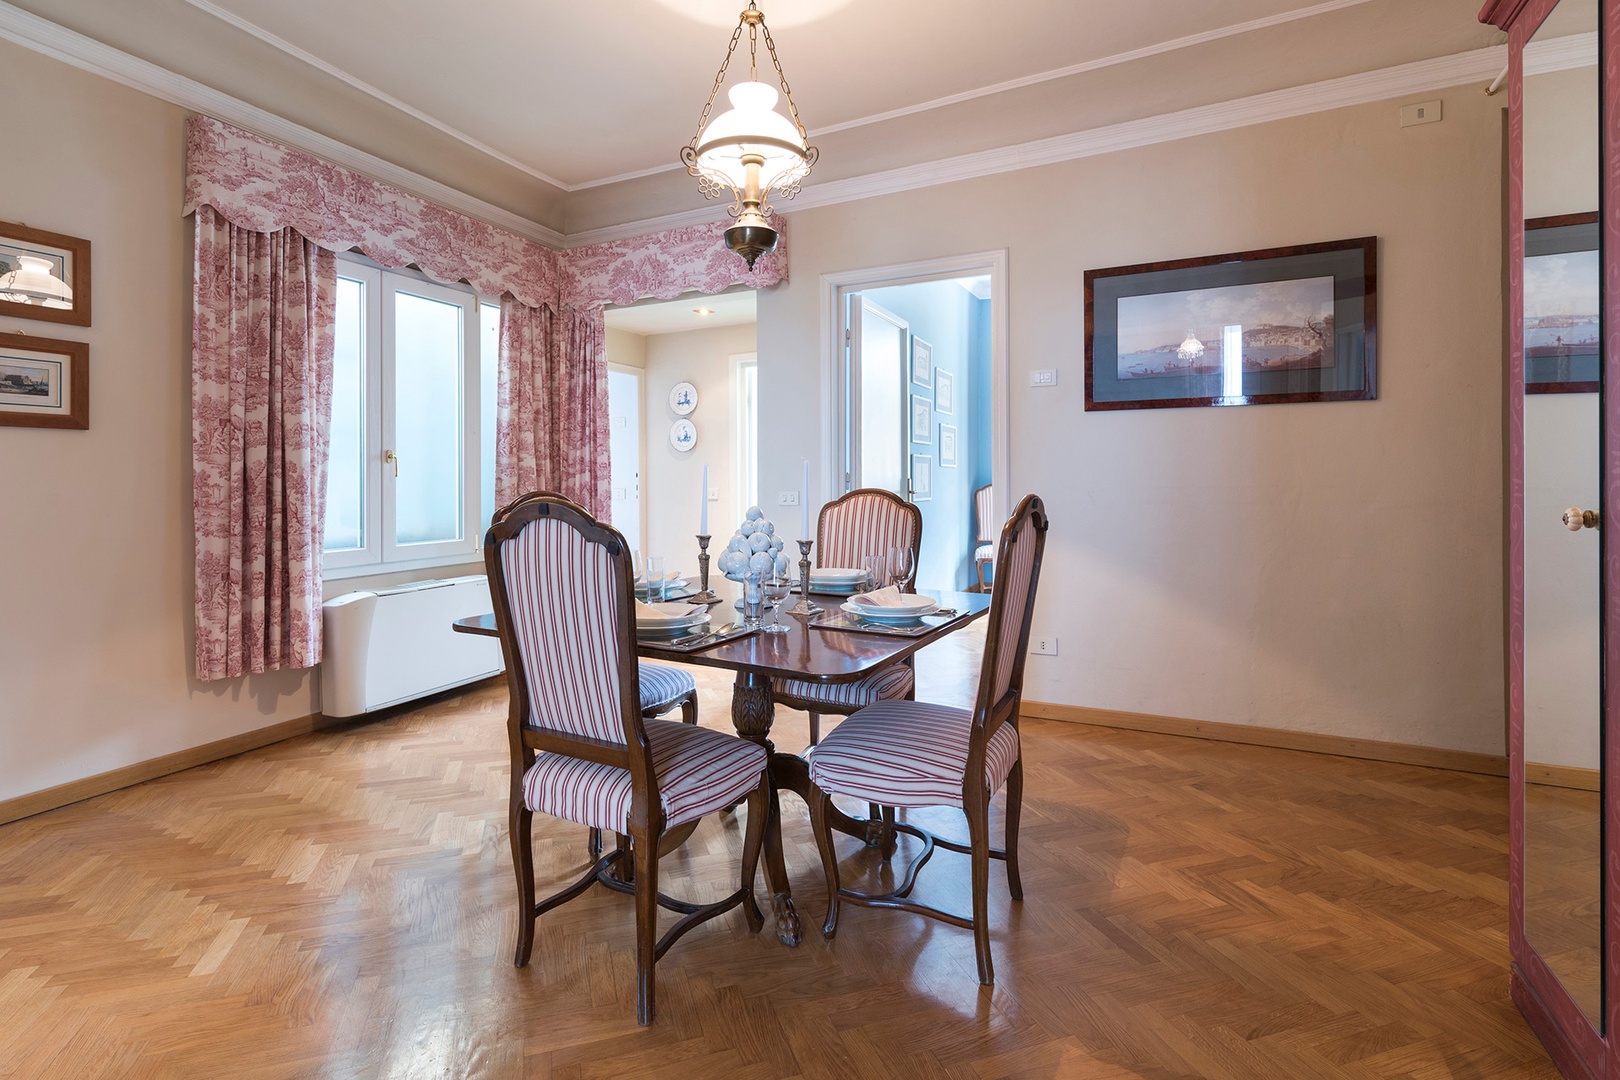 Dining room is at the center of the apartment, with easy access to the living room and kitchen.